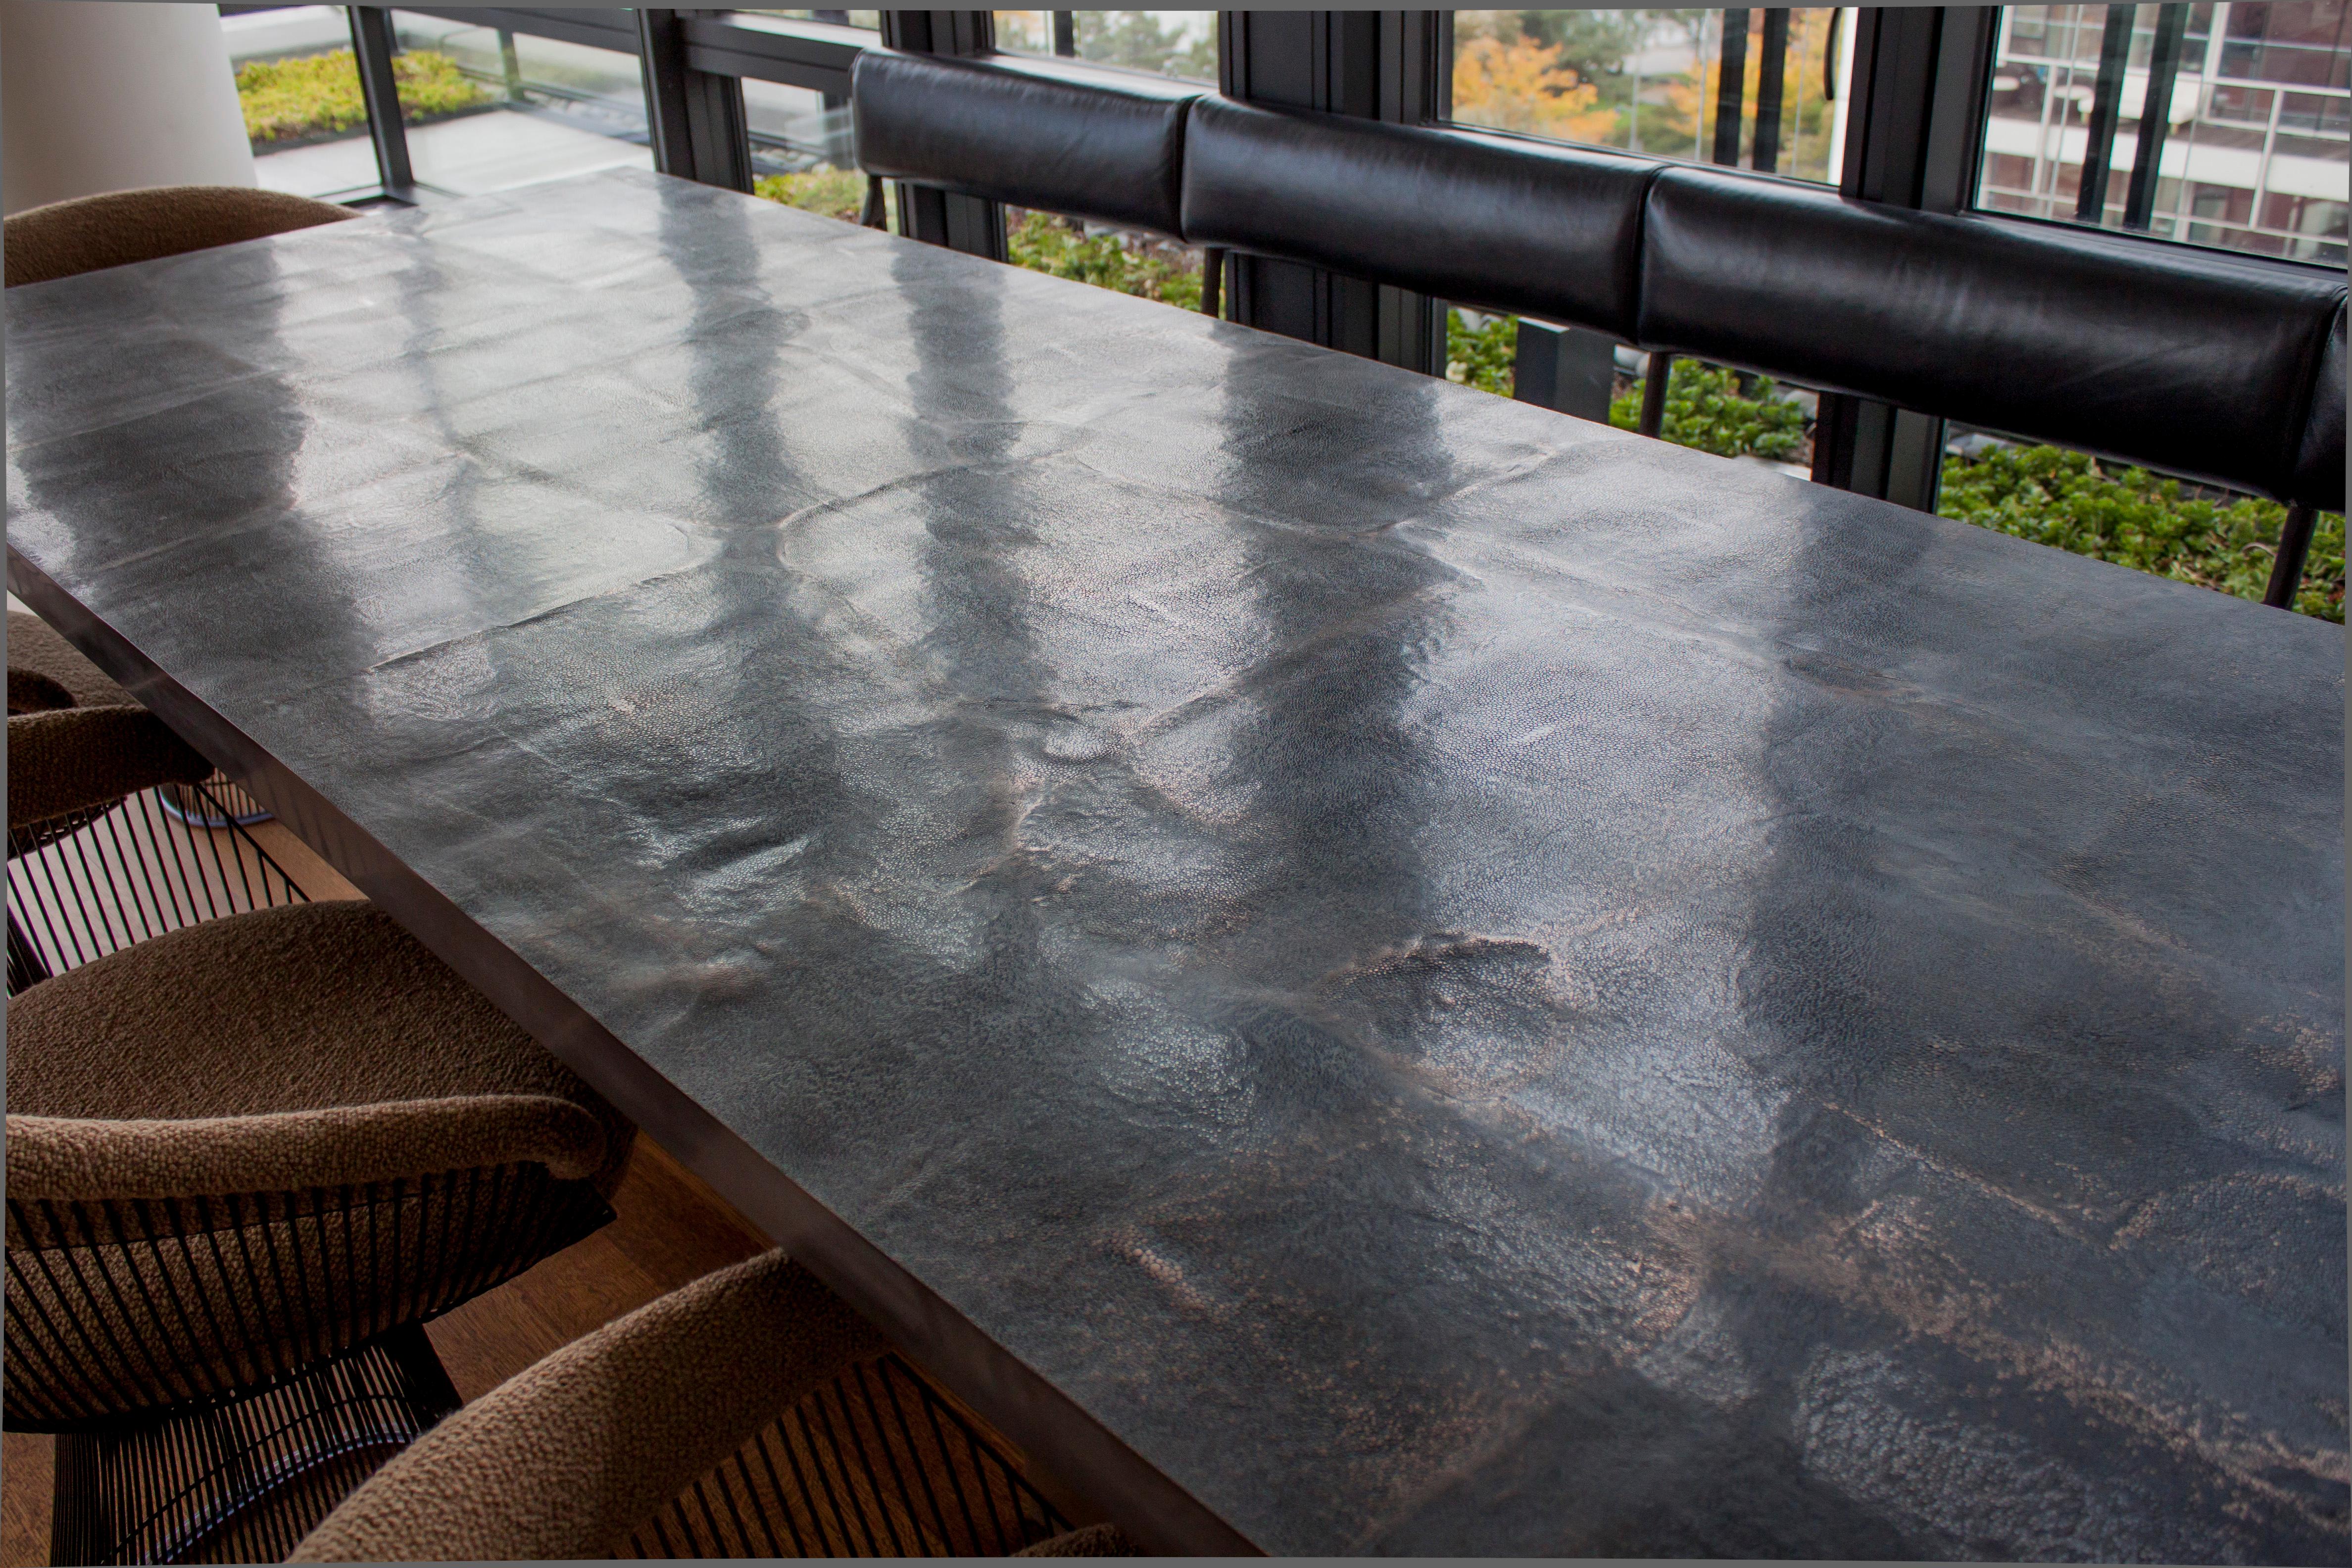 Abound with surface detail of the polished micro-pebble texture and the very gentle undulating waves of the table surface itself, this table will continue to fascinate you and inspire the best company and cuisine. From afar one notices the